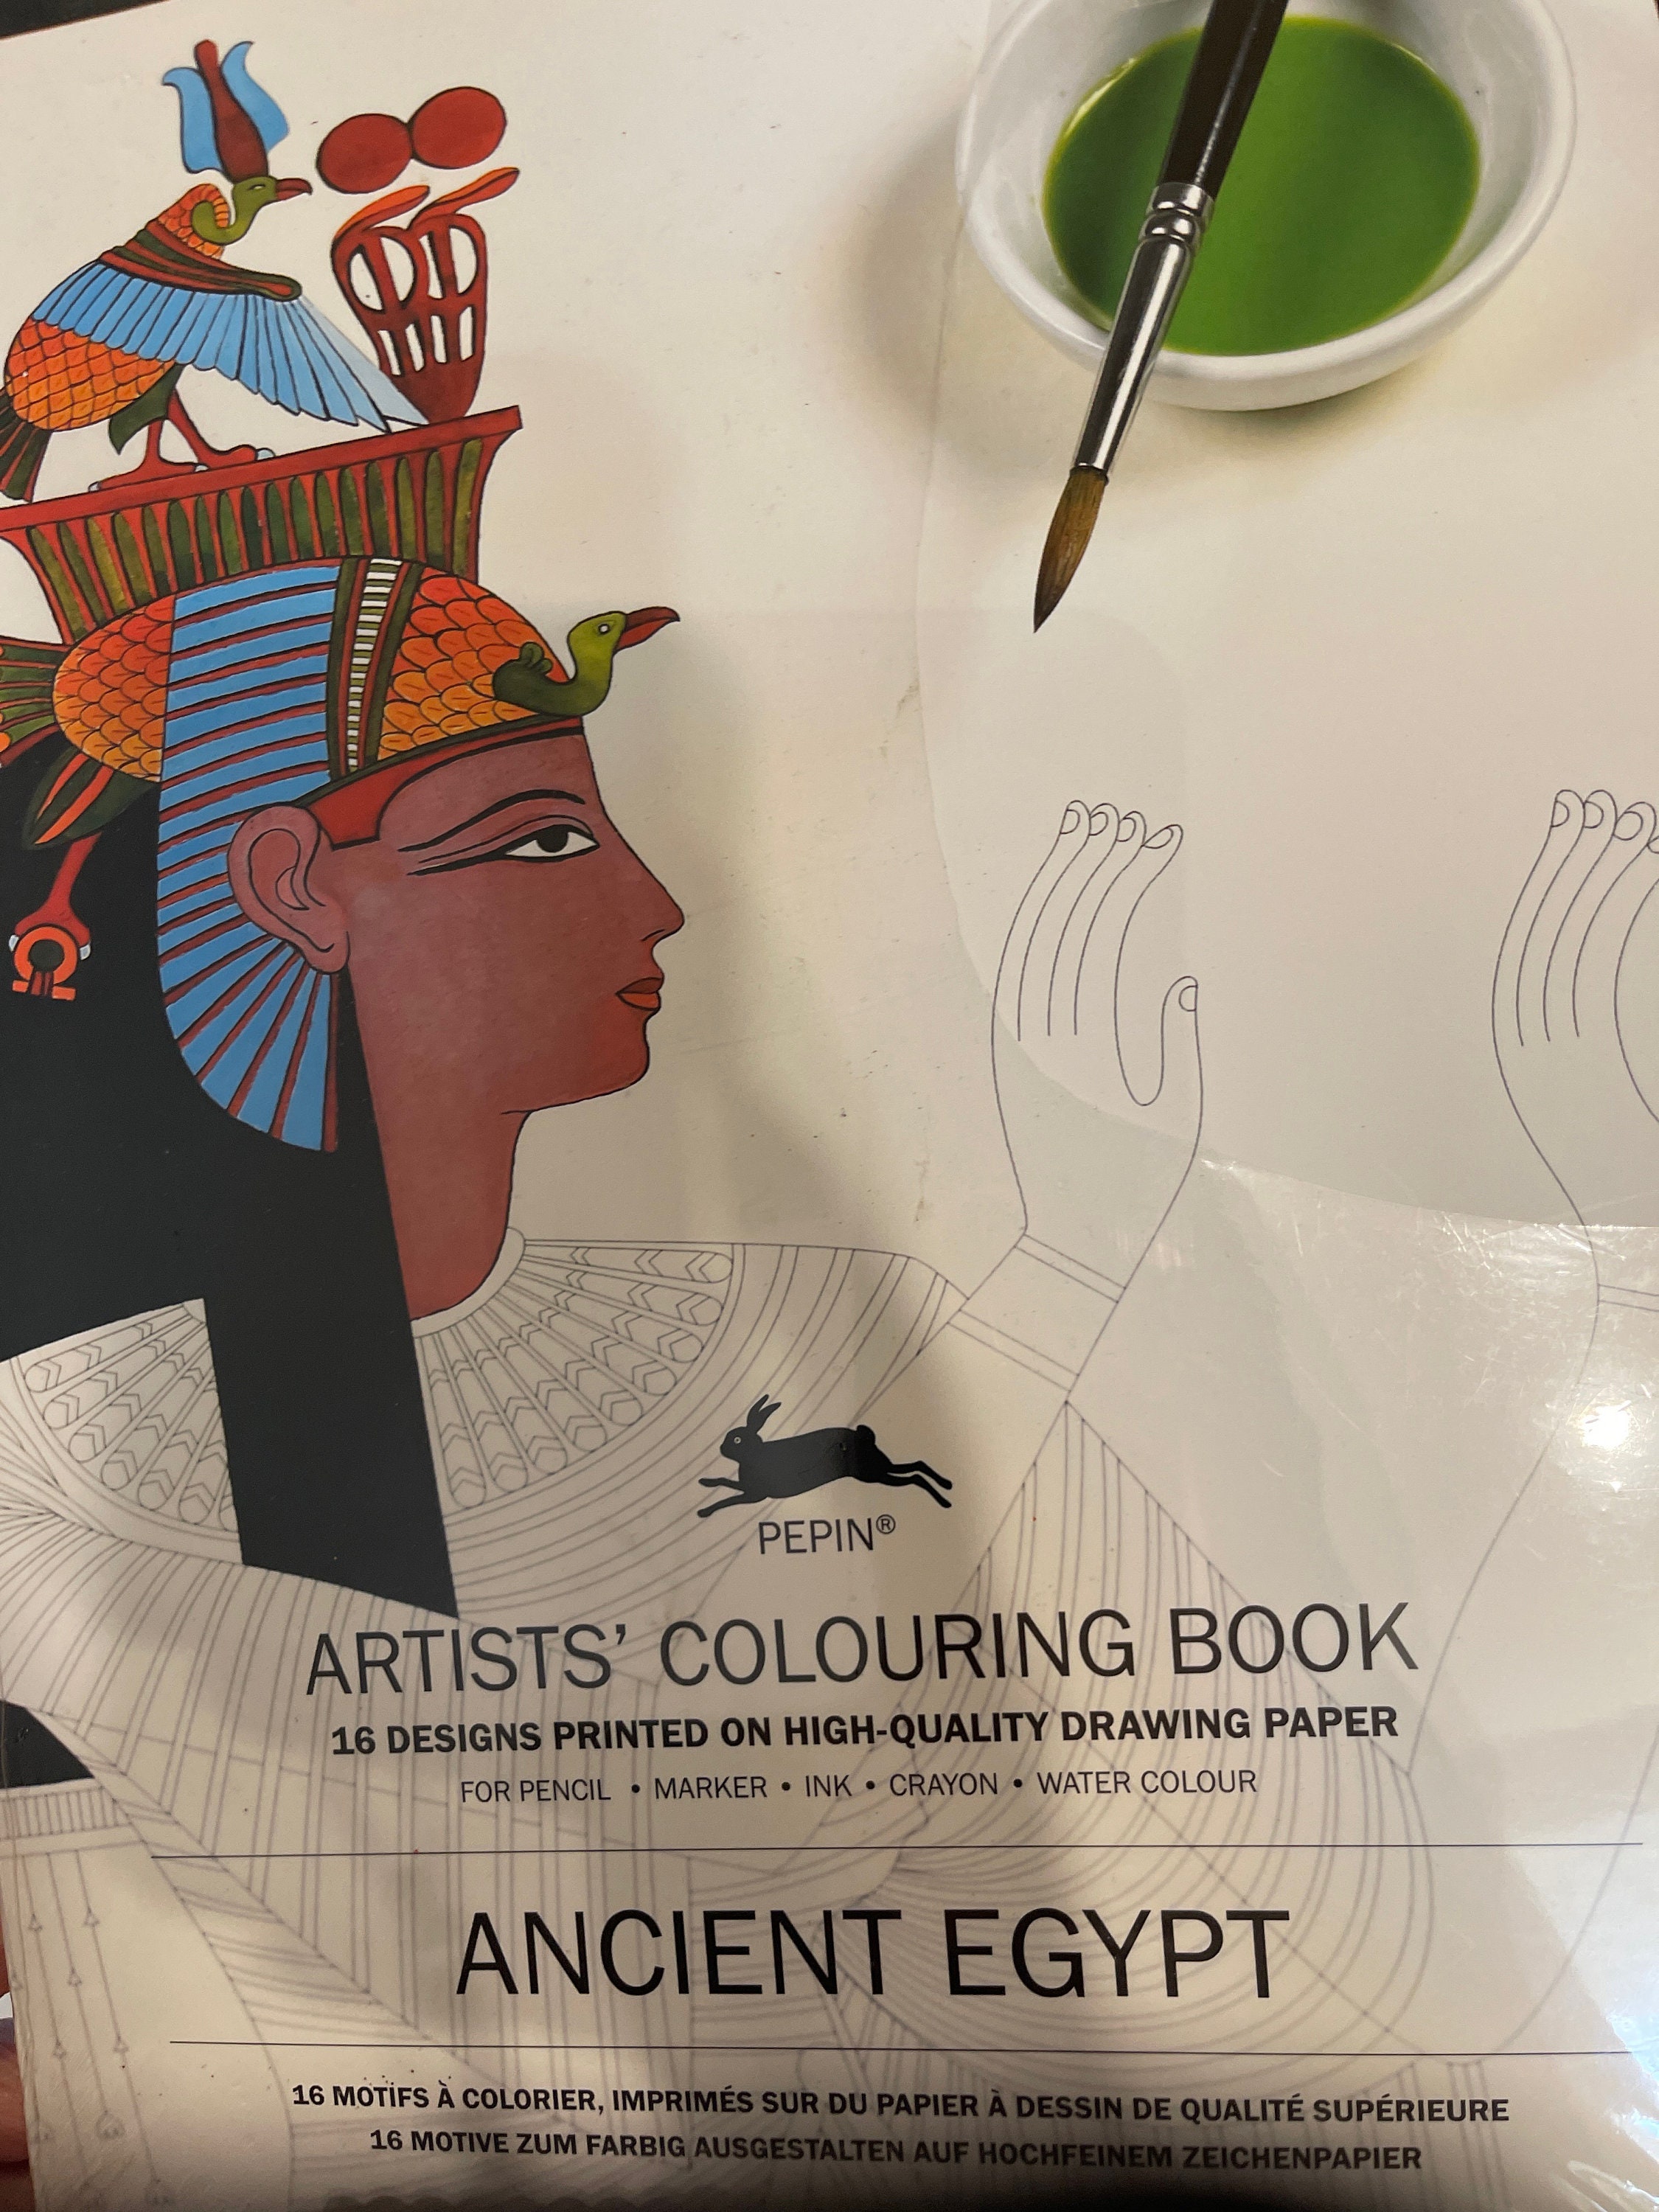 Artists' Colouring Books Archives - The Pepin Press